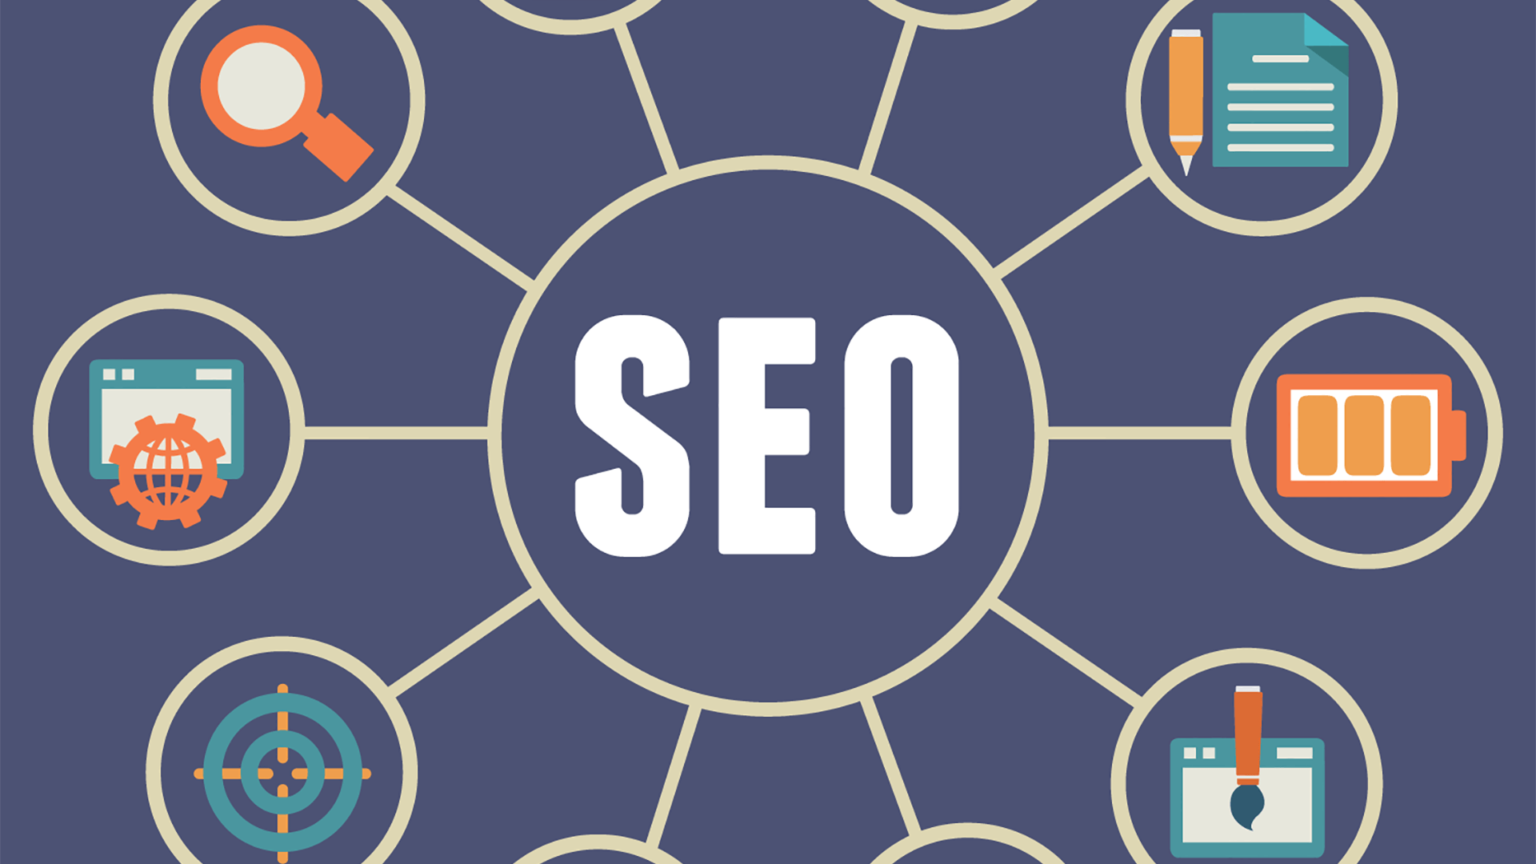 This is your ultimate seo guide.